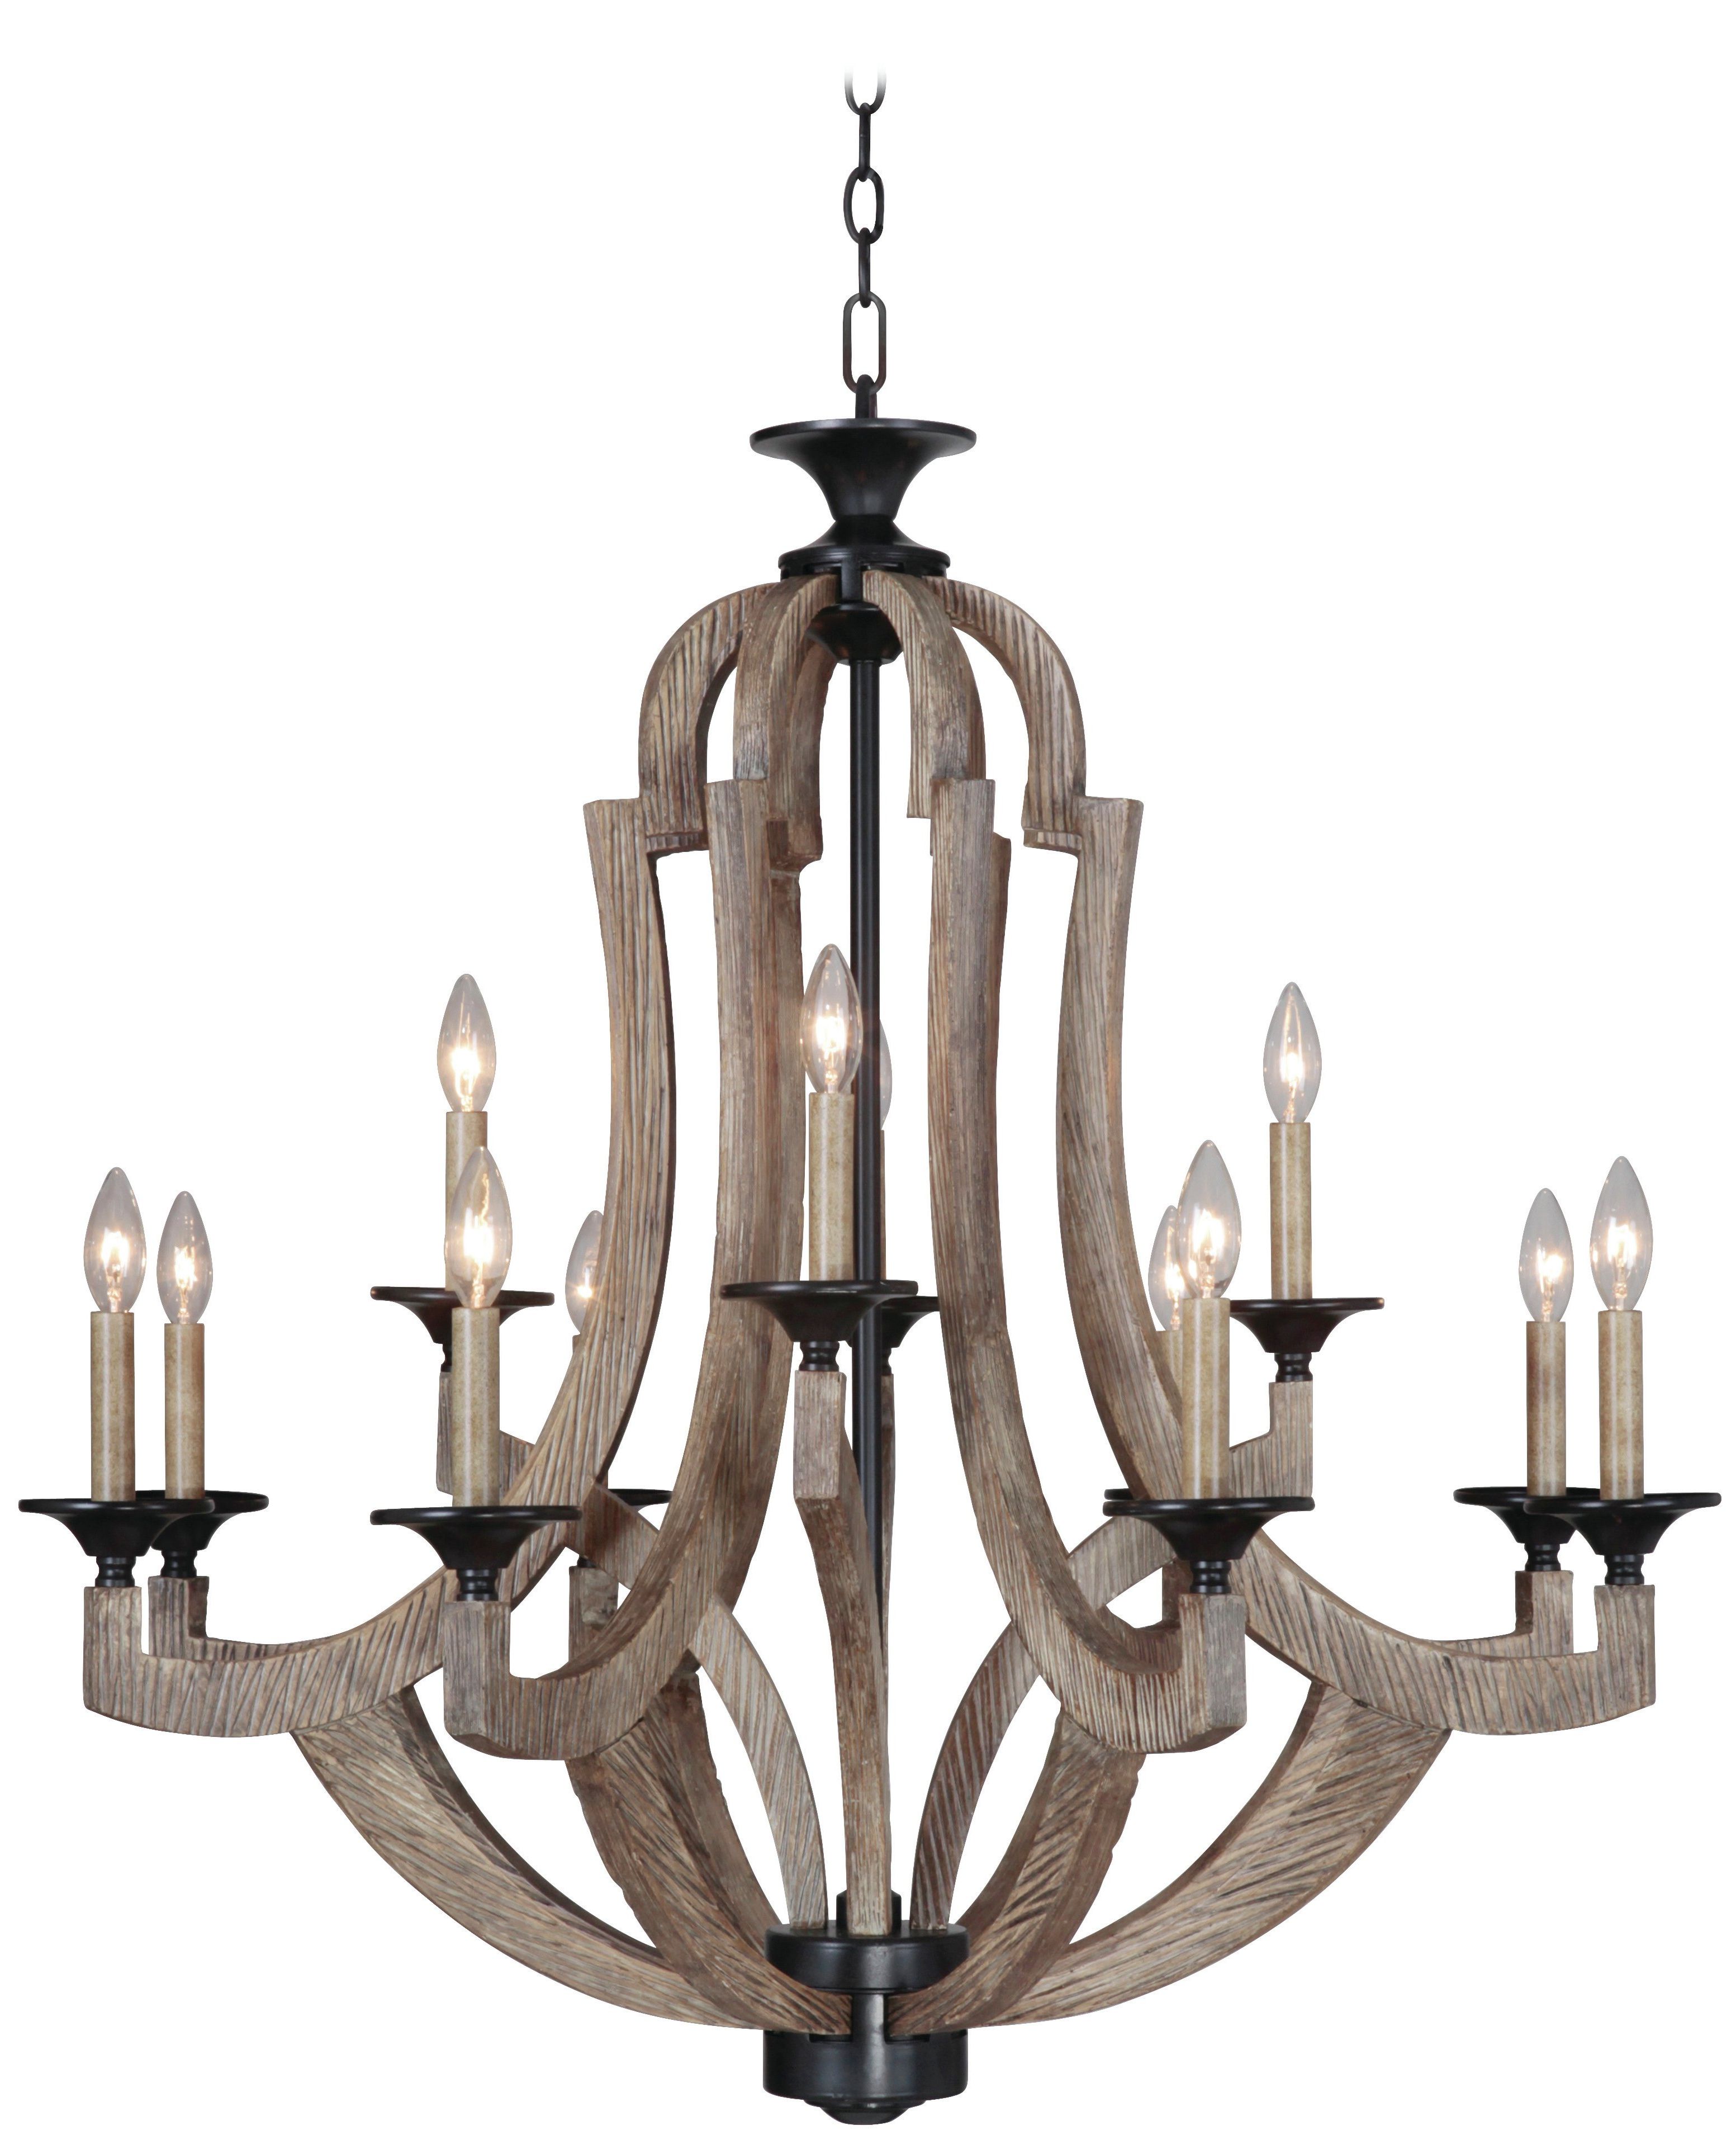 Kenedy 9 Light Candle Style Chandeliers Within Well Known Laurel Foundry Modern Farmhouse Marcoux 12 Light Empire Chandelier (View 15 of 20)